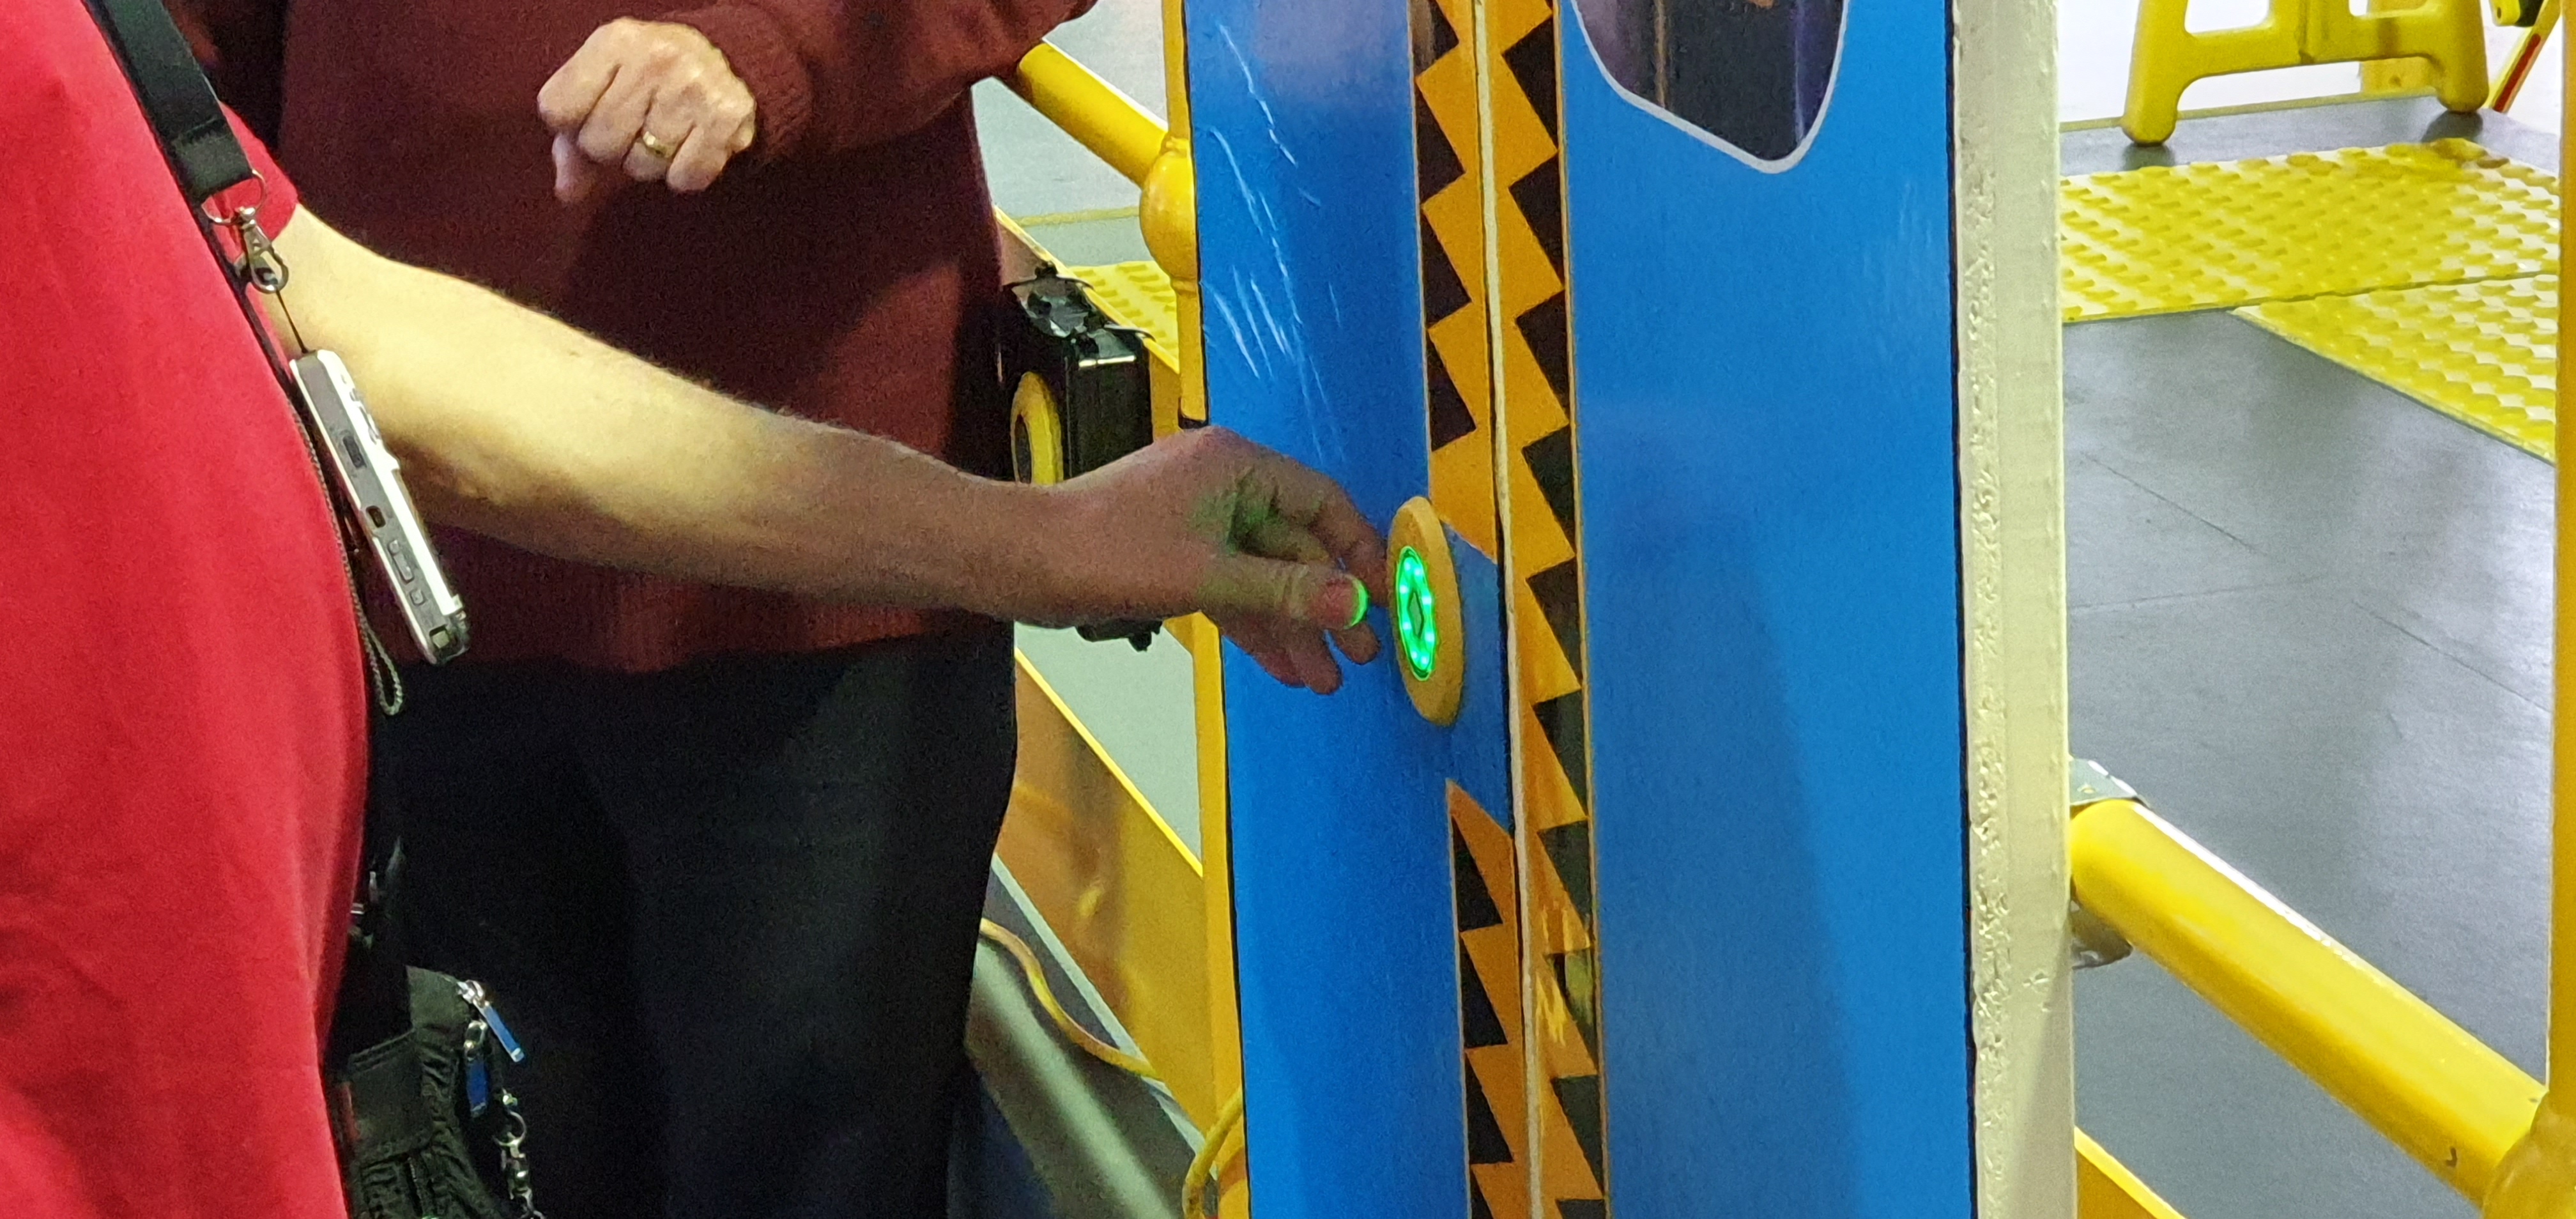 "A close-up of a hand pressing the open button on a train door."